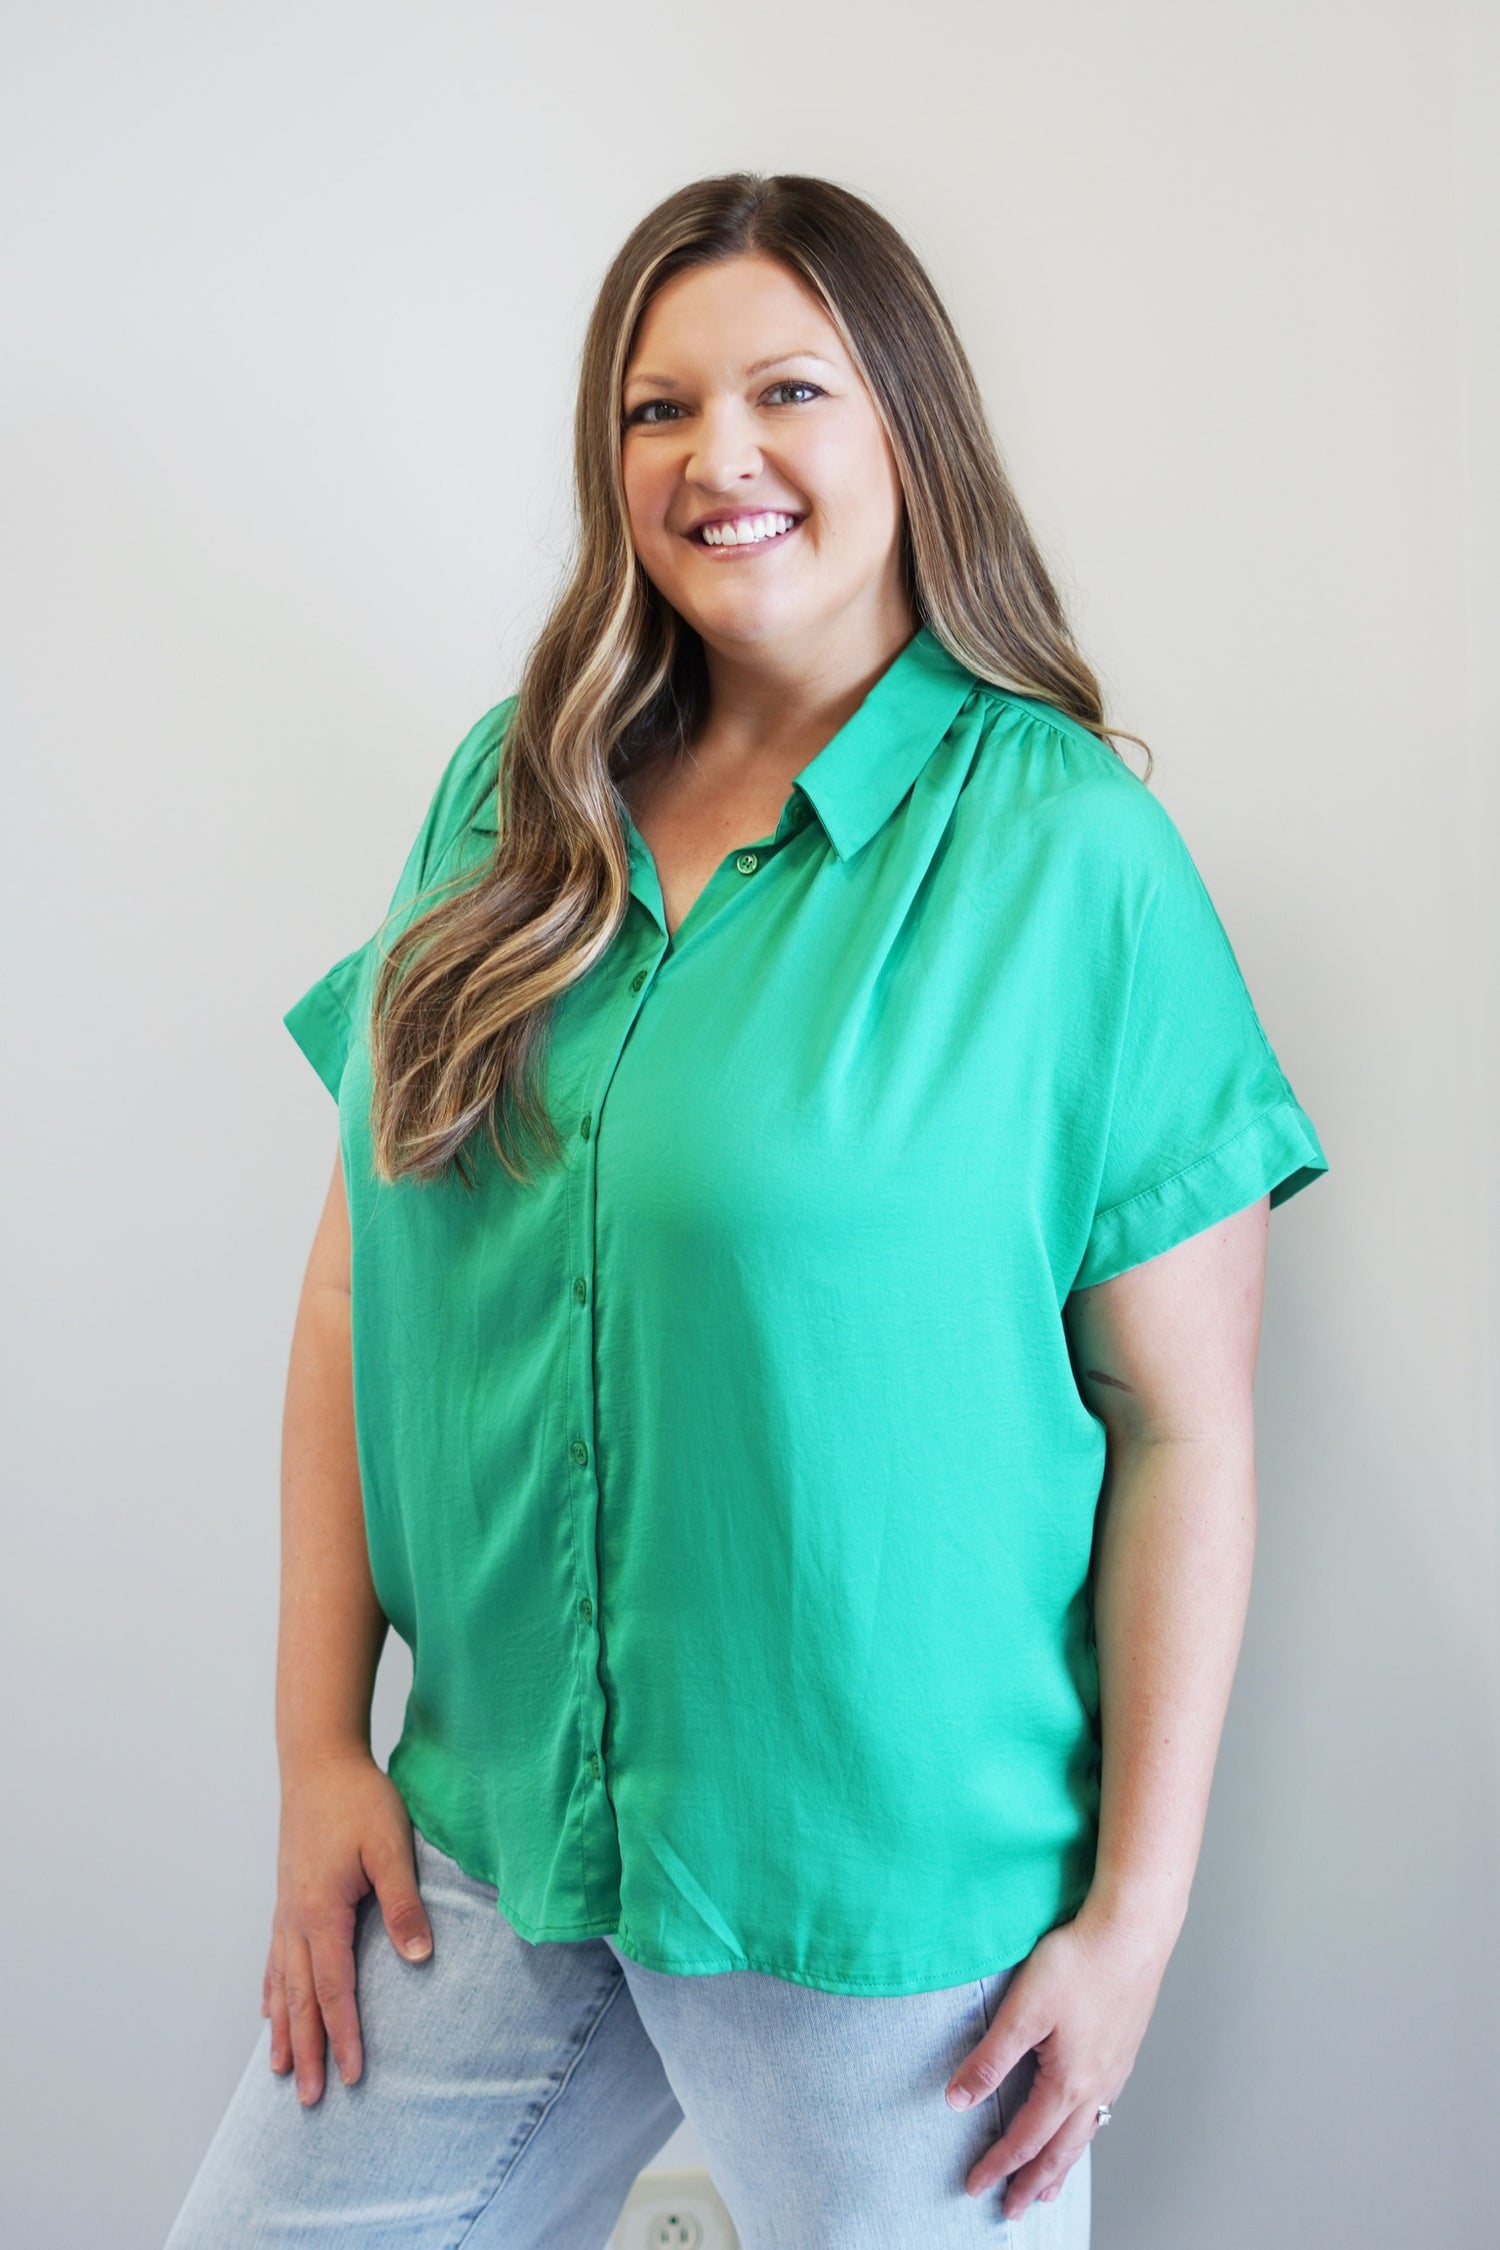 Chasity Button Up Blouse Collared Neckline Button Up Short Cap Sleeves Colors: Emerald and Hot Pink Loose Fit Full Length 100% Polyester Hand Wash Cold, Low Iron as Needed, Line Dry, Do Not Wring or Twist Model is wearing a size 1XL